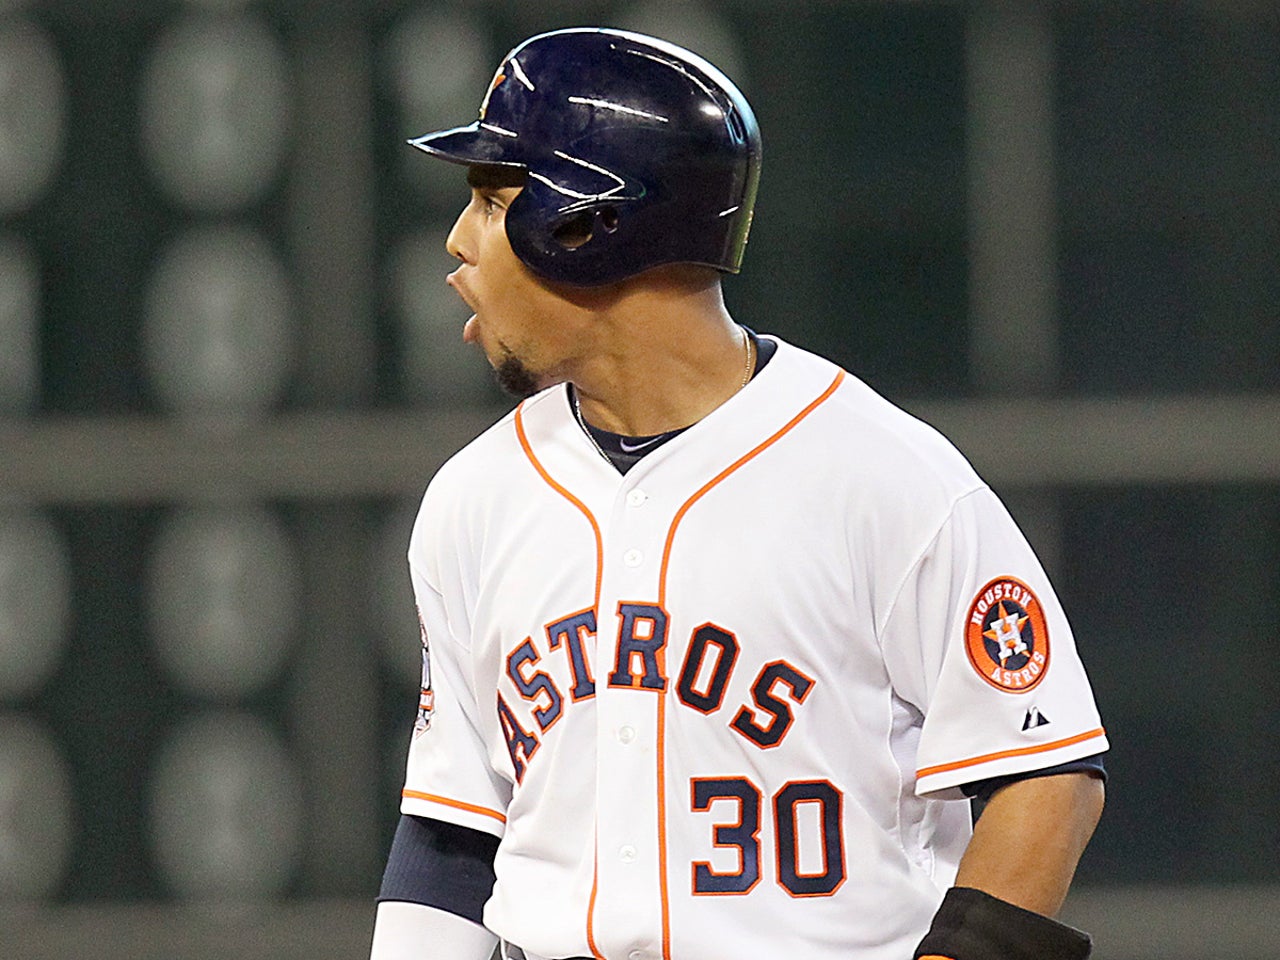 Mets could use Carlos Gomez and his hot bat in the big leagues